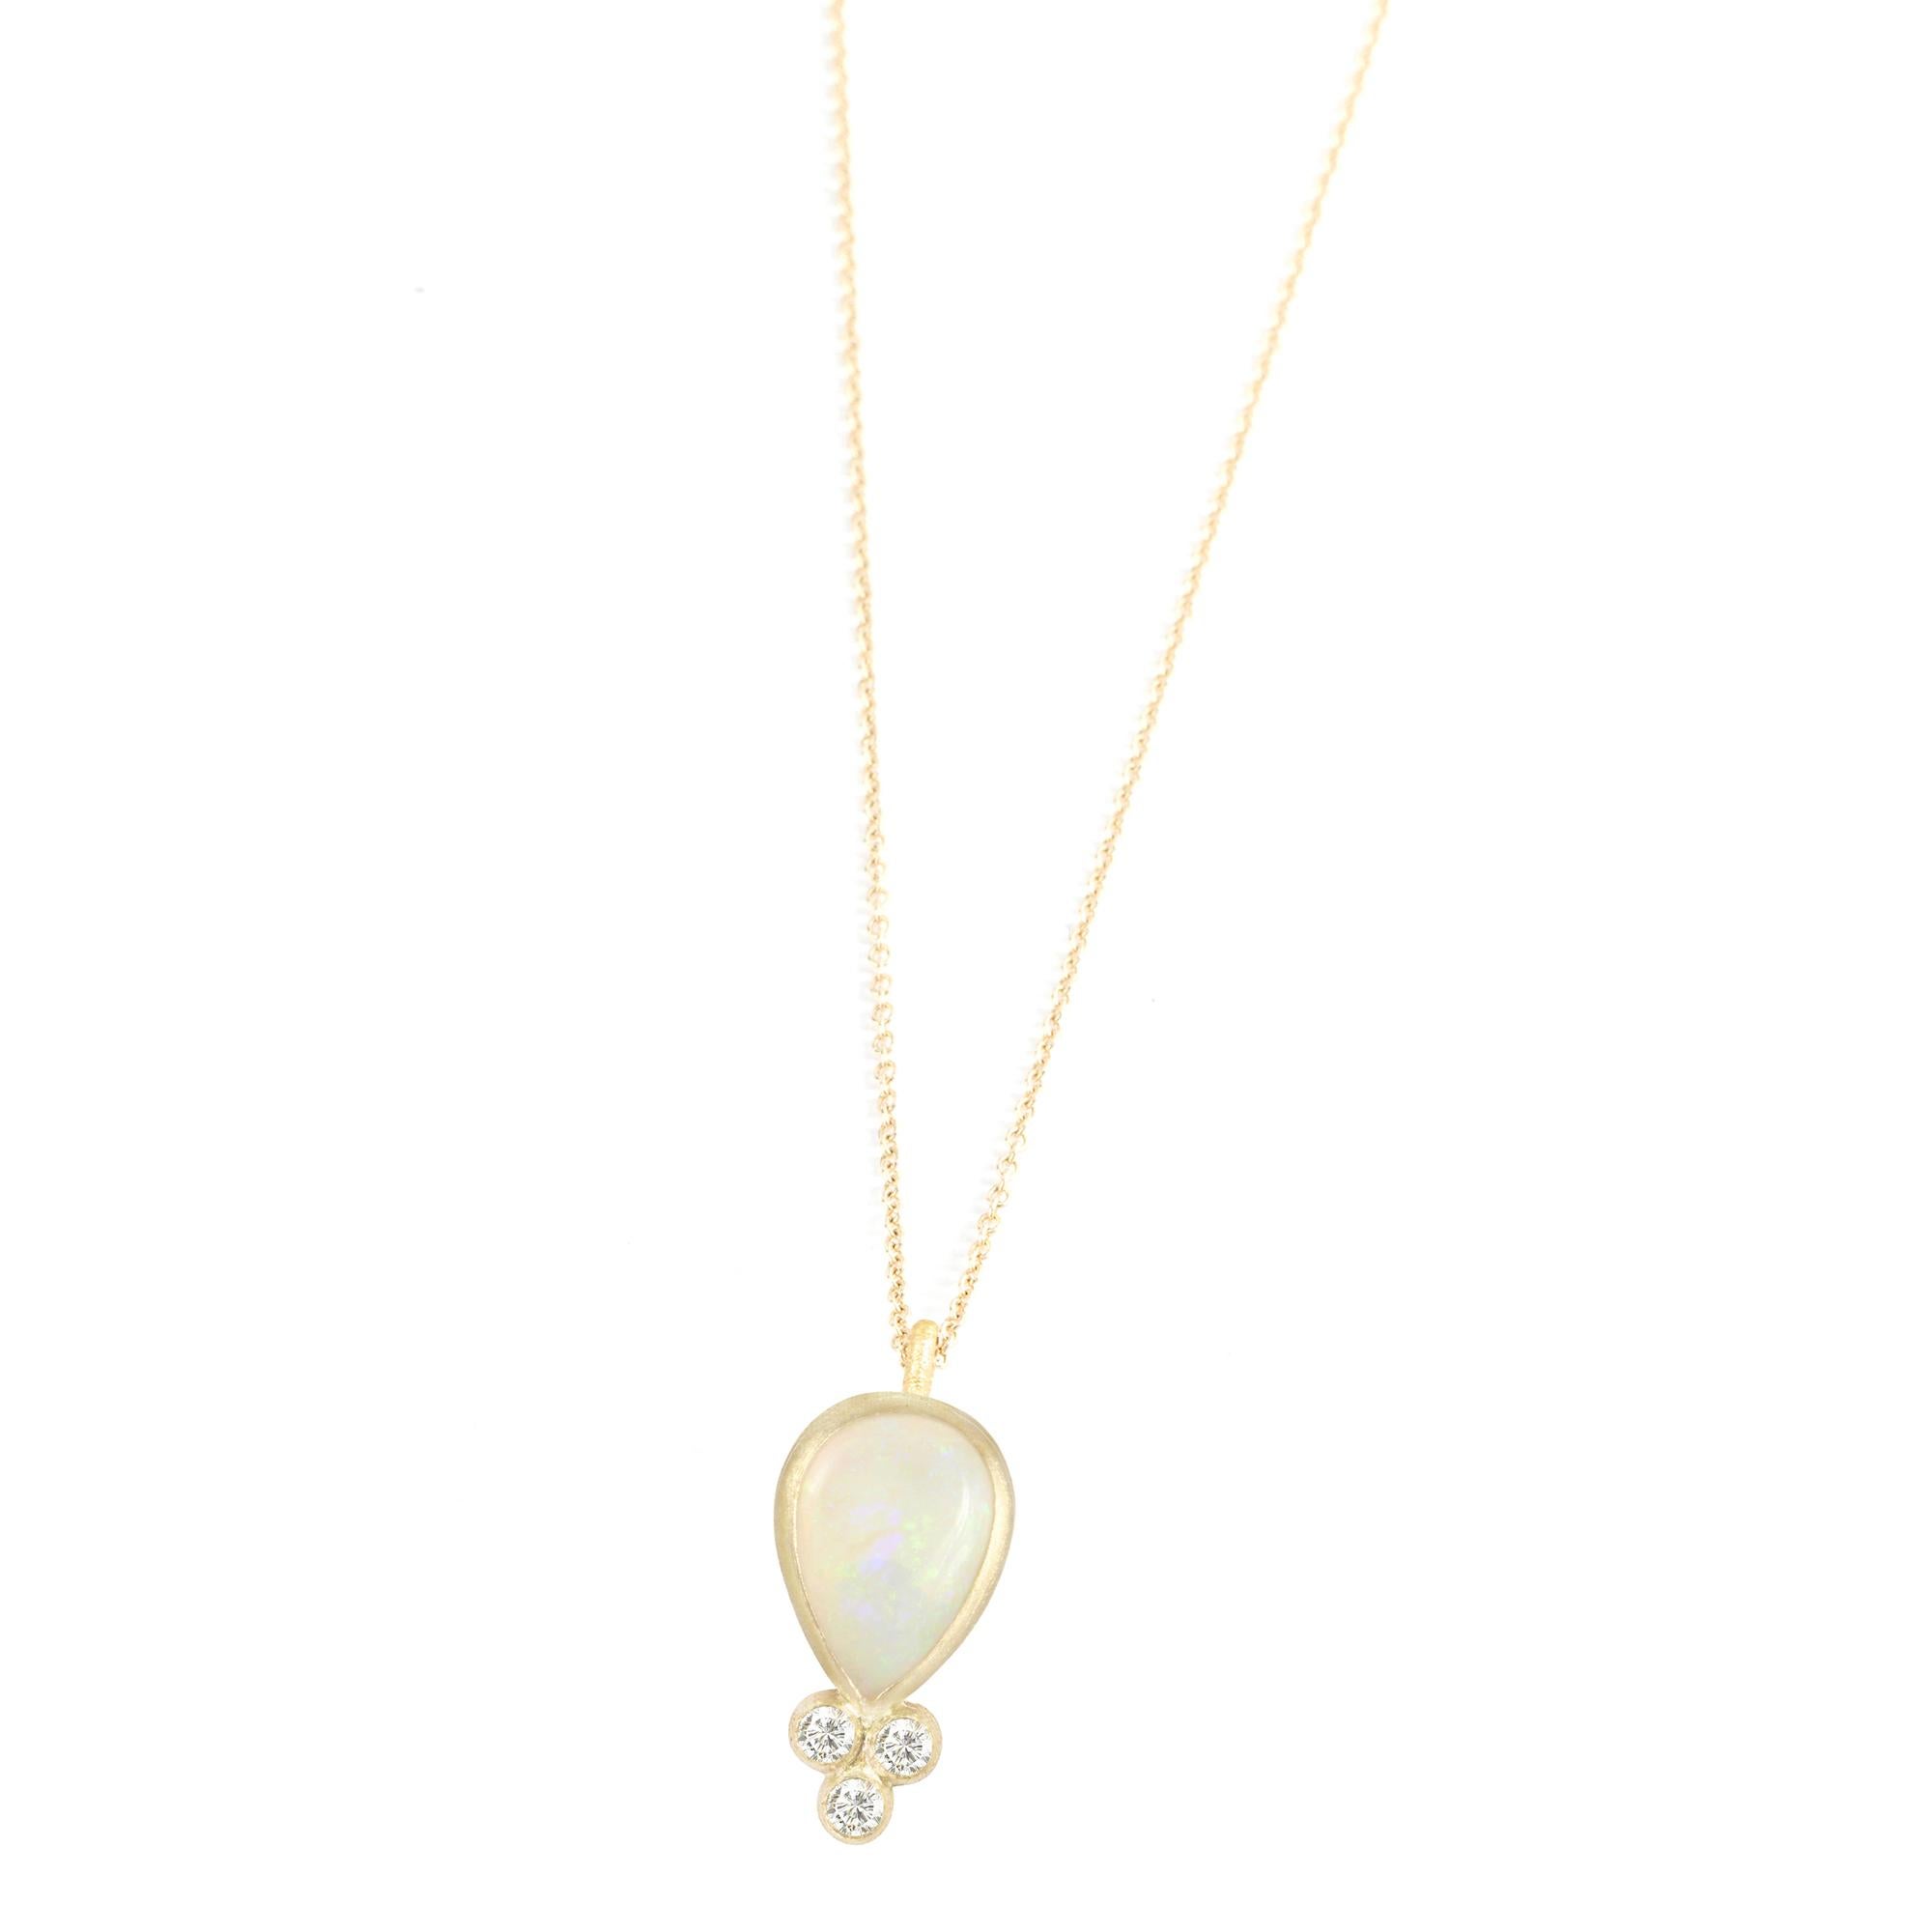 With its single, bezel-set white opal, the diamond-accented Lilly Gold Necklace is clean and elegant, and a very feminine style you can wear day in, day out.

Metal: 18K Yellow Gold
Stone carat: 1
Diamond carat: 0.0225
Length: 16-18''
Stone size: